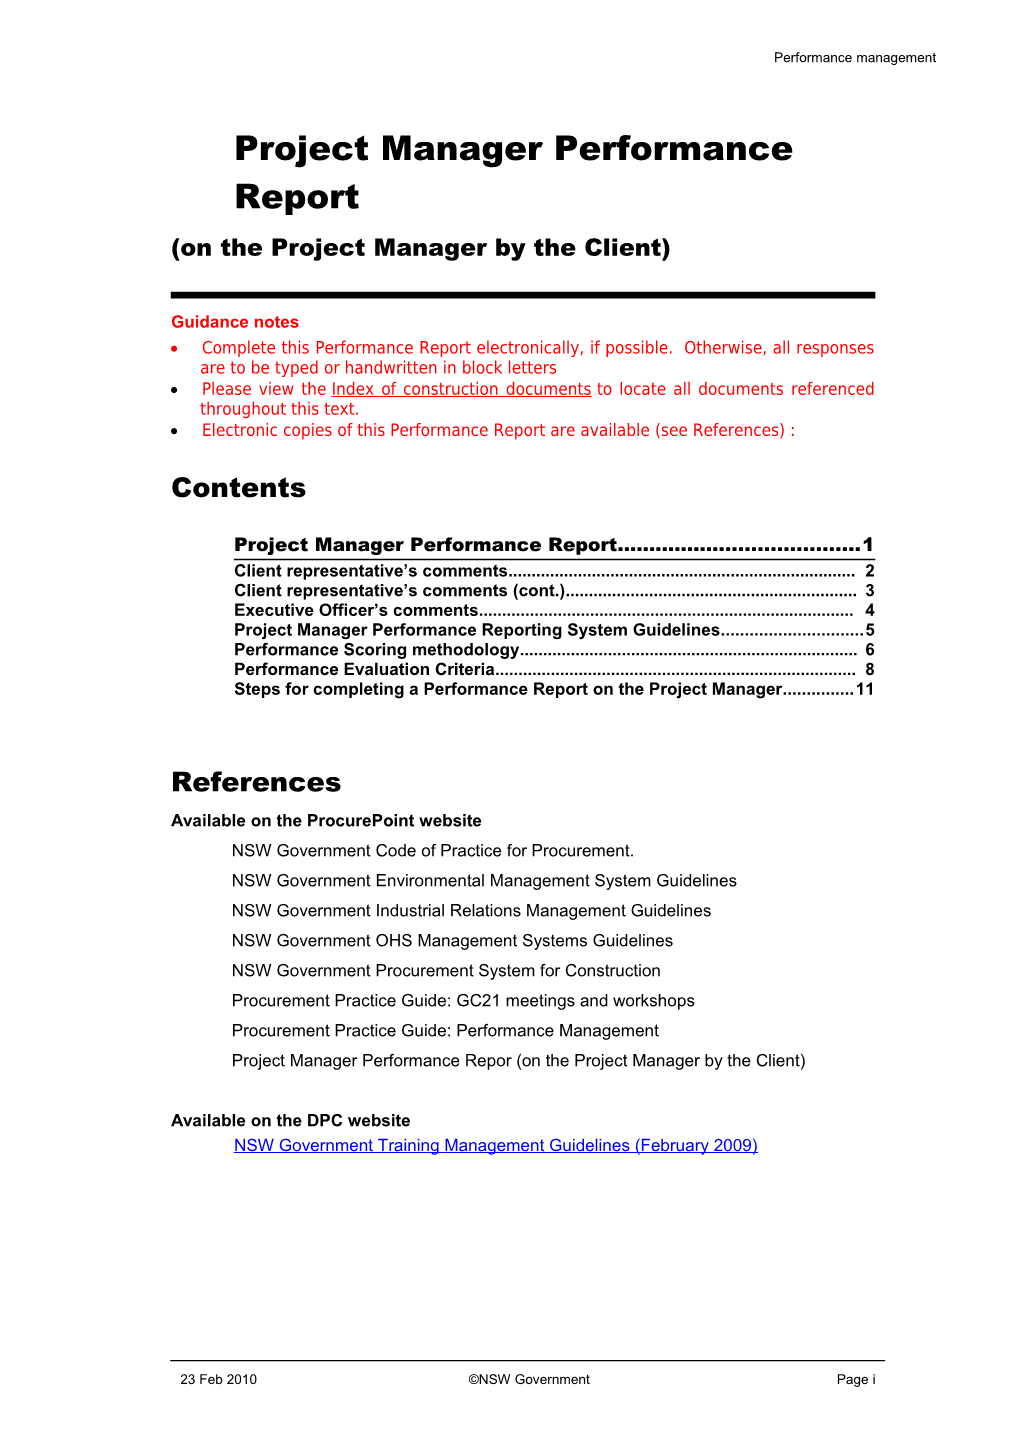 Project Manager Performance Report